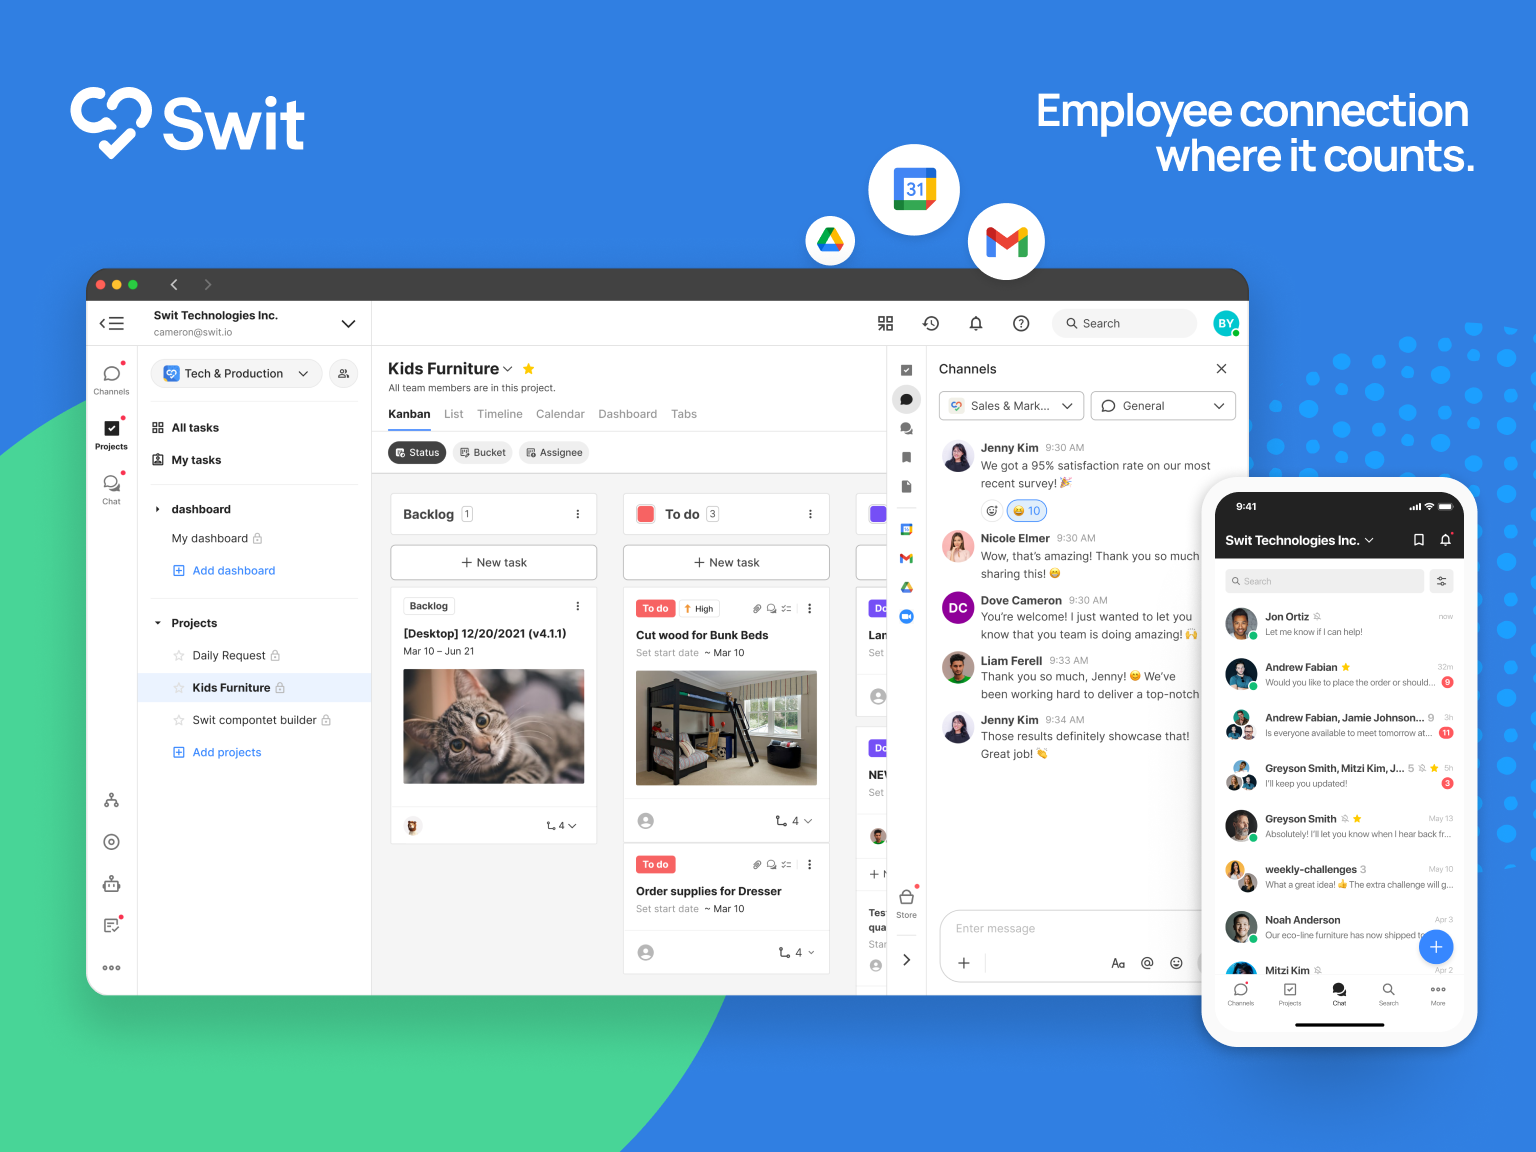 Swit: Employee connection where it counts